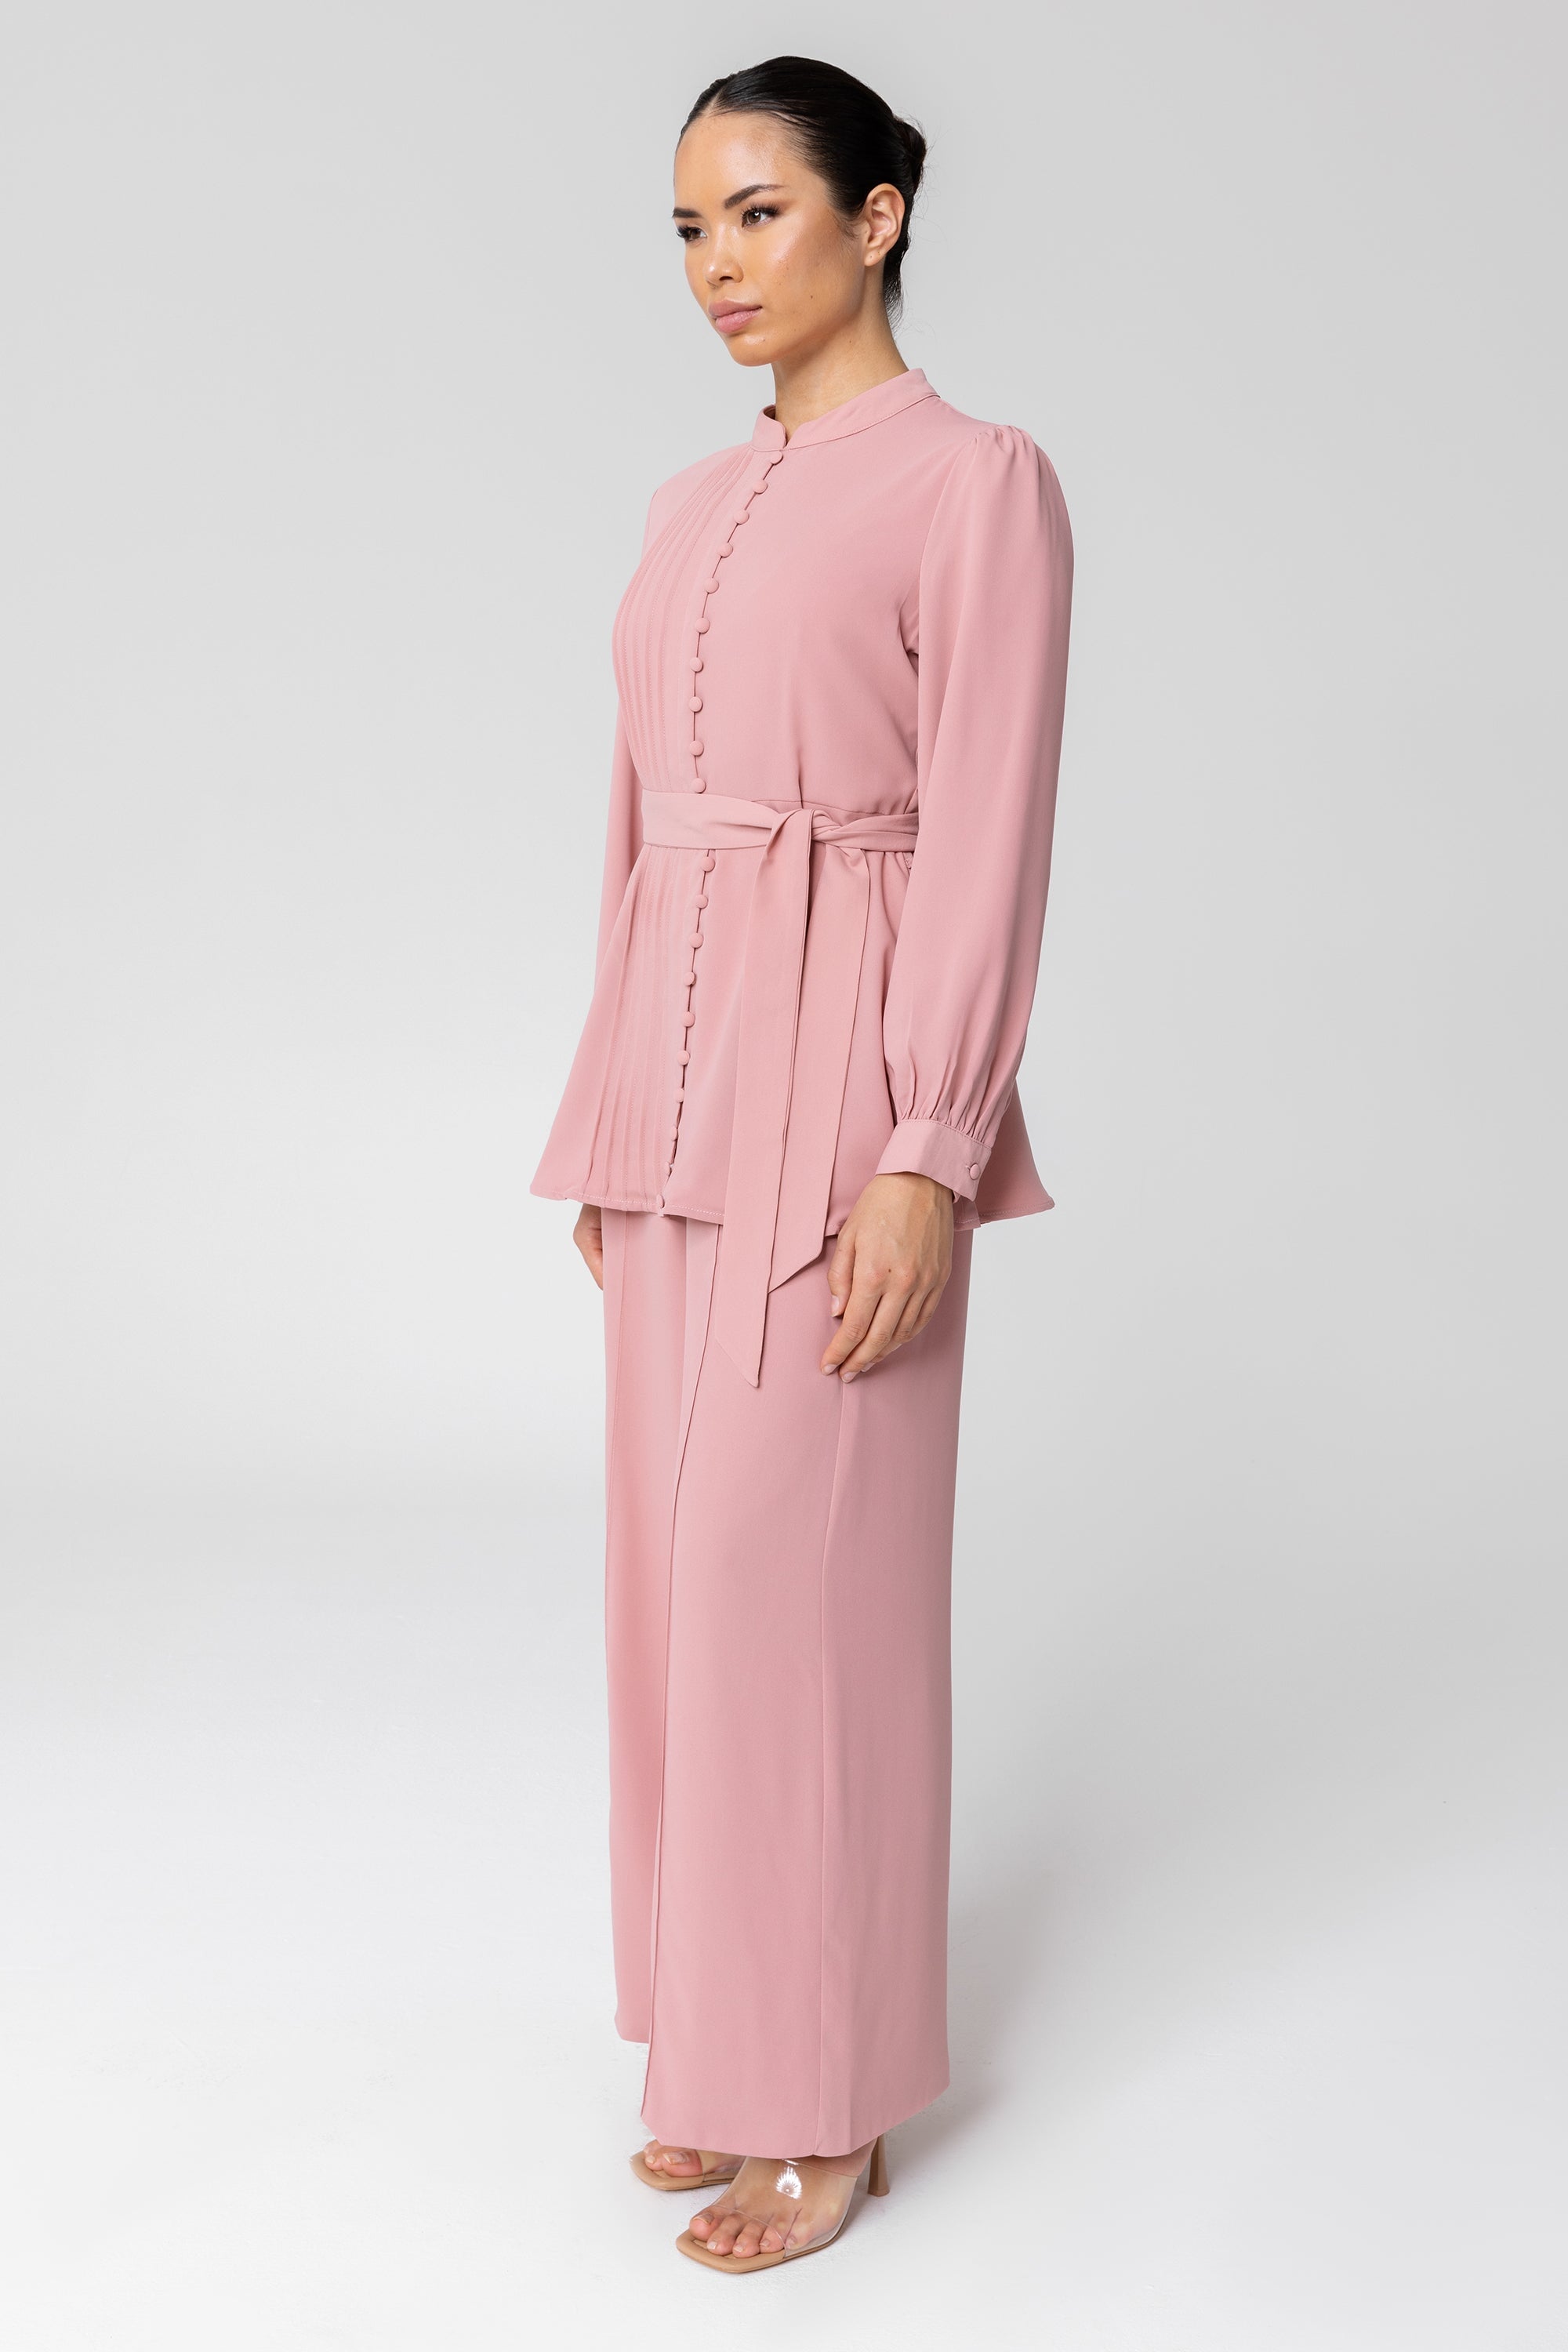 Hena Wide Leg Pants - Dusty Pink Veiled Collection 